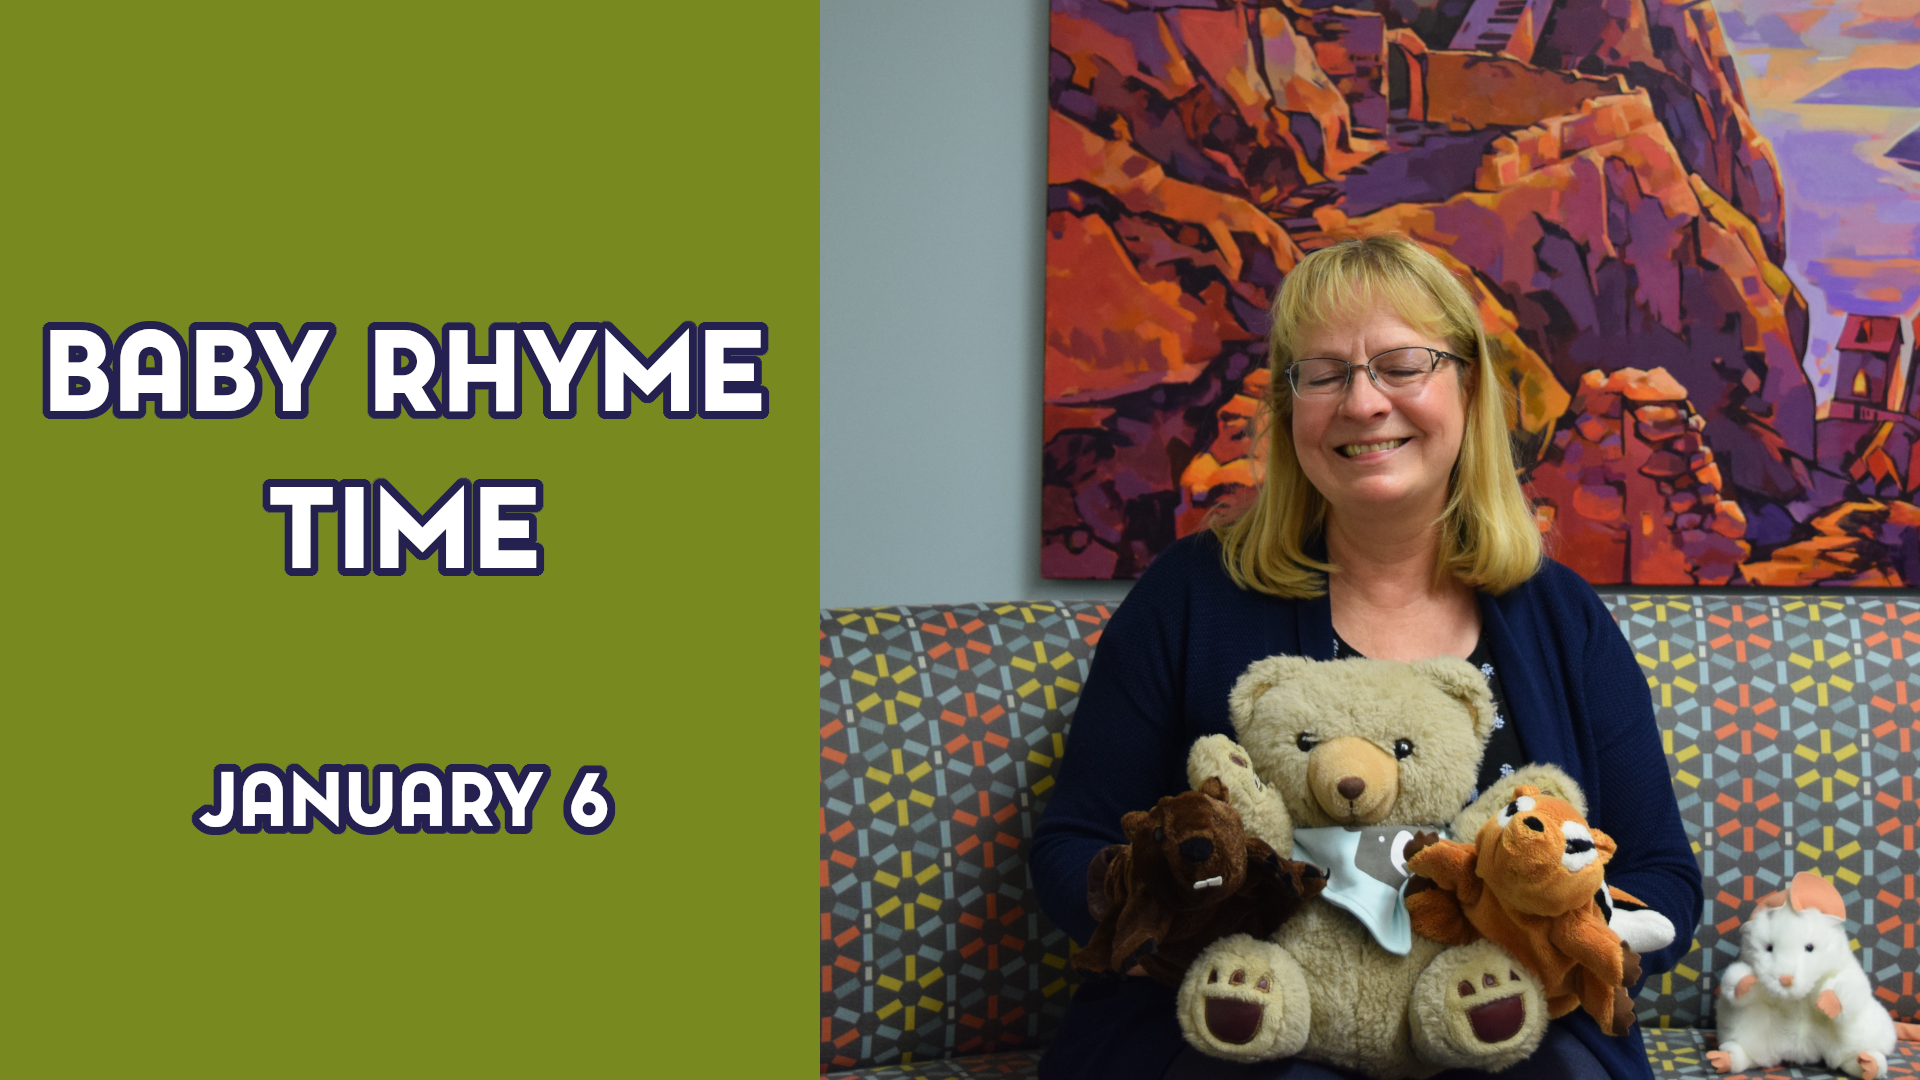 A woman holding a stuffed bear next to the text "Baby Rhyme Time January 6"